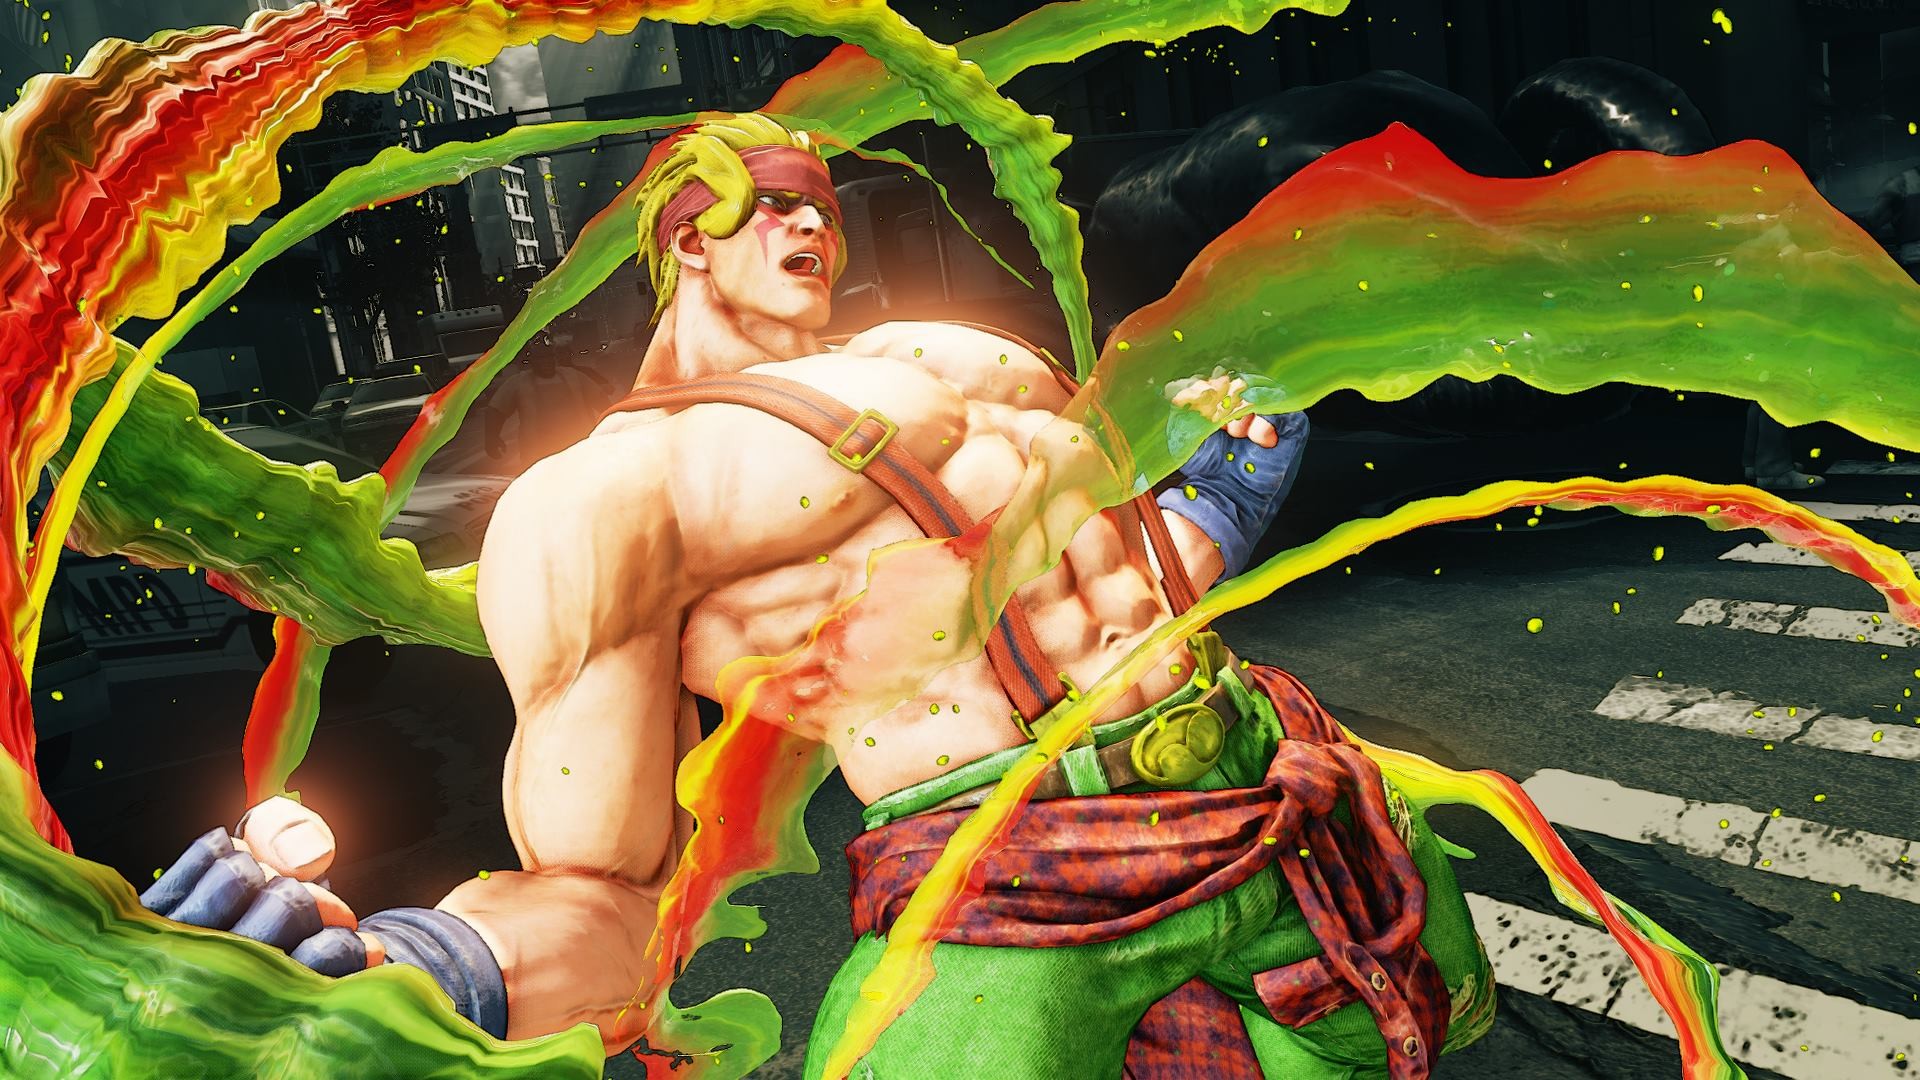 1920x1080 Street Fighter 5's Guile DLC revealed for April release [Update]